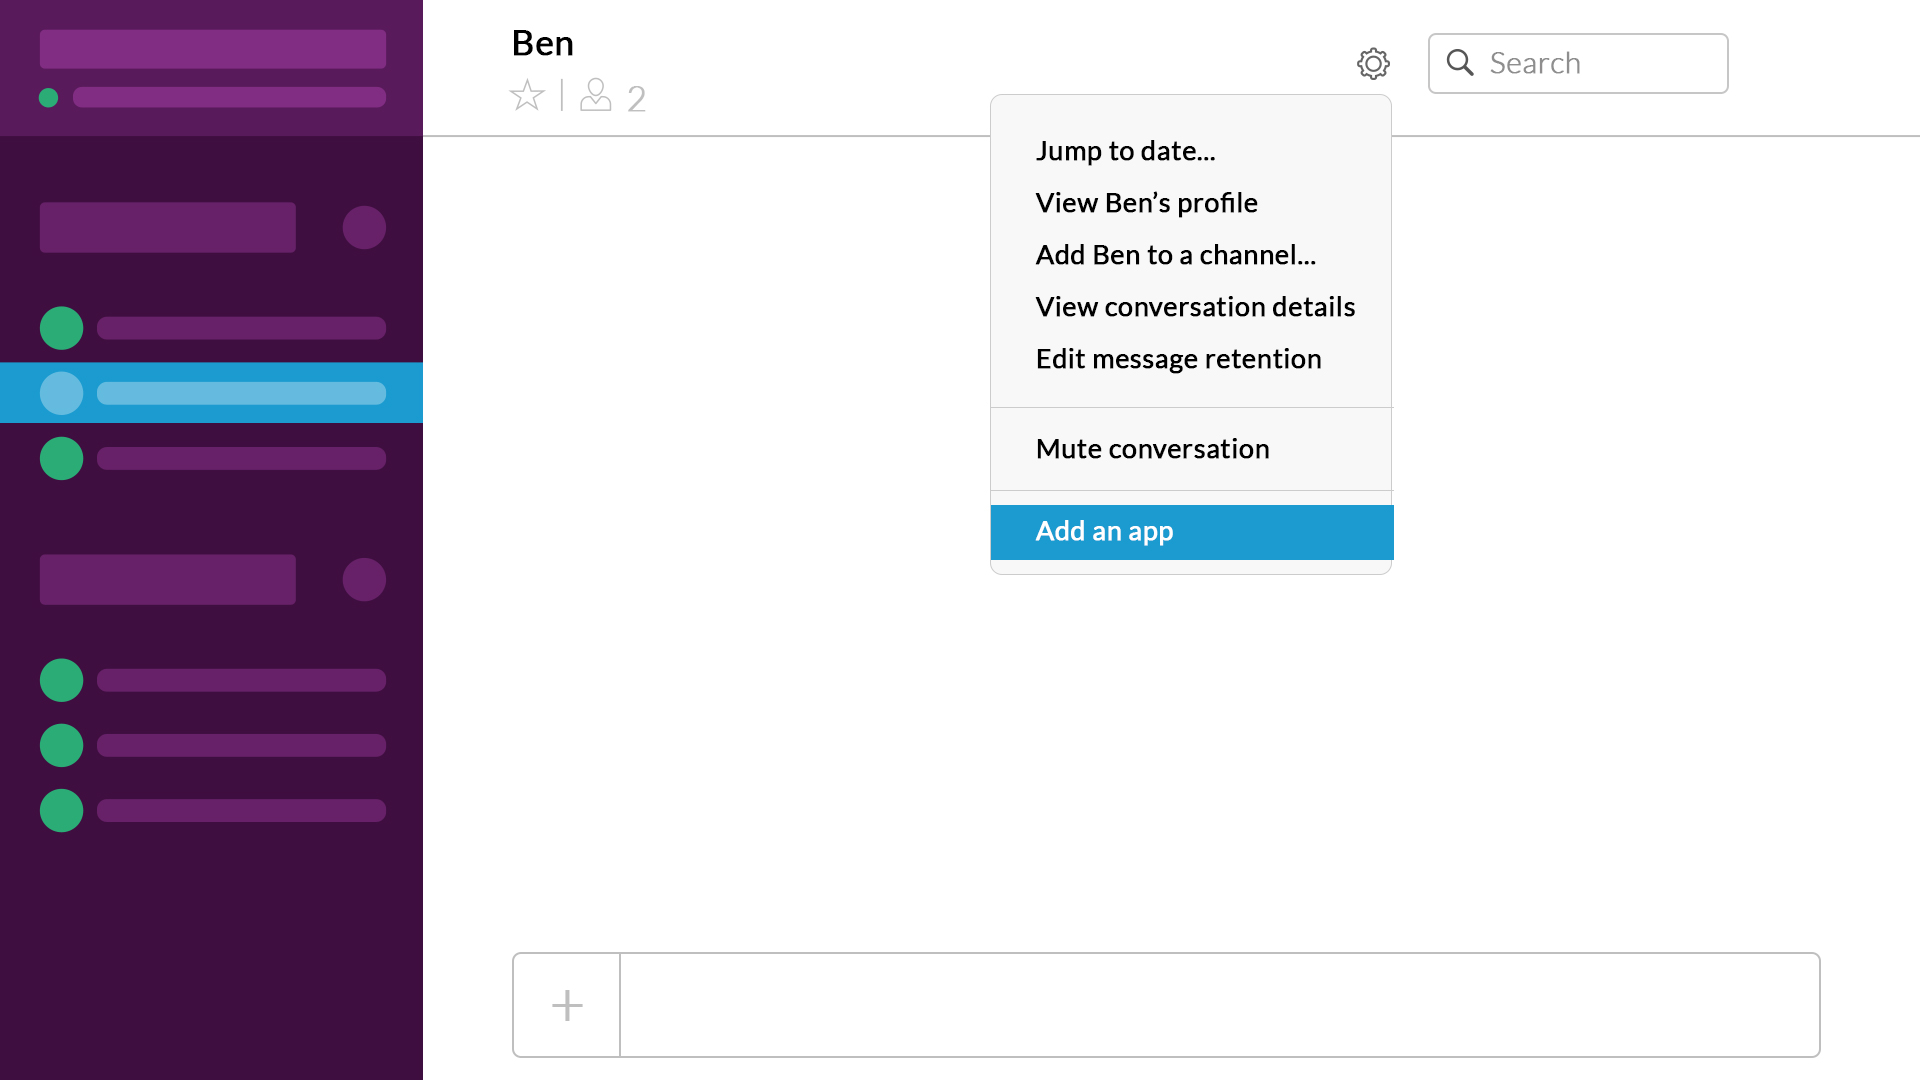 Image of the Slack app, with "Conversation Settings" open and "Add App" selected.